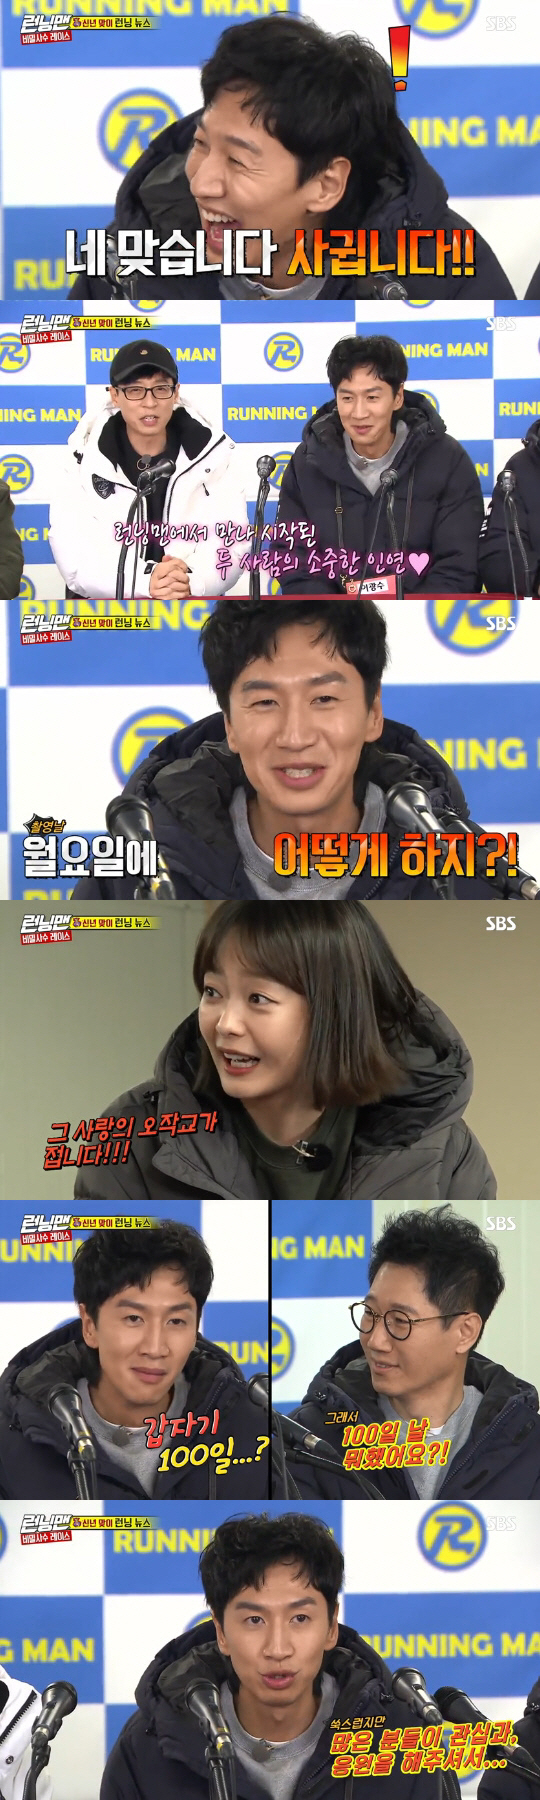 Running Man Lee Kwang-soo has become Love Giraffe in The Rough Man.Lee Kwang-soo confessed his devotion to Lee Sun-bin on SBS Running Man broadcast on the afternoon of the 13th.First, Yoo Jae-Suk said, Lee Sun-bin and Lee Kwang-soo, who appeared as Running Man guests, developed into lovers.Lets listen to the heart, he said, referring to Lee Kwang-soo and Lee Sun-bins devotion.Lee Kwang-soo said, In fact, I was worried about what I was doing on the day of shooting Running Man.Thank you, he said with a shy smile.Haha said, Lee Kwang-soo continues to be a character genealogy of a bum, but what will you do now? Will you give me a good deal?Then, Jean So-min said, I will try it once.On the same day, Jean So-min was surprised to find out that Lee Kwang-soo - Lee Sun-bin couples love mismatch.I want to be proud, Im a love erratism, I gave you the number, said Jean So-min, with a smile of joy.Members have poured storm questions into Lee Kwang-soo and Lee Sun-bins romance.Lee Kwang-soo, who asked what he did when he was 100, said, In fact, neither of them is the style to take that.When asked about the future plan, he said, I am grateful that many people have been interested and cheered.In the appearance of Lee Kwang-soo, who carefully expressed his devotion, the members laughed at All You Need is Love.On this day, the members were mischievously joking about Lee Kwang-soos devotion during the mission.When Cheongha and Kim Do-yeon appeared as guests, Yo Jae-Suk said, If it was the same as before, the wild water would have built a three-way city.Lee Kwang-soo was embarrassed by saying, It is still so. Then, he showed two poems called Cheonggukjang Hanyo in the name of Cheongha.Yoo Jae-Suk then teased the end, saying, Now you can go this way, now take out love, it becomes clear because you exclude love.Also, when Lee Kwang-soo tried to do the mission, Jean So-min performed the obstruction, shouting Love Giraffe!Other members also interfered with Lovers, I think it will be done well, I will be done when I love you, and as a group, Winners REALLY REALLY was enthusiastic.Eventually Lee Kwang-soo threw off his shoes and furiously laughed.Meanwhile, on December 31 last year, Lee Kwang-soo and Lee Sun-bin officially admitted they were in a relationship; both agencies said, The two have been feeling good for five months.I ask for your warm gaze. The relationship between the two began when Lee Sun-bin appeared on MBCs Radio Star in August 2016 and named his ideal type Lee Kwang-soo.At the time, Lee Sun-bin said, Its not a quiet love style, its active.Lee Kwang-soo will be well suited to the reaction when he sees the reaction on the air. A month later, in September 2016, the first meeting between the two was finally made through Running Man.Lee Kwang-soo was given a mission to date celebrities who chose him as his ideal, and he was dating Lee Sun-bin.Lee Sun-bin expressed his affection sincerely, repeatedly emphasizing that Lee Kwang-soo is ideal throughout the broadcast.Lee Kwang-soo also showed excitement at Lee Sun-bins active appearance and said, I decided to date Lee Sun-bin from today.I will announce marriage next week. The pair, who met again in 2017 through Running Man, formed a pink air current again, and finally became a real couple last year.